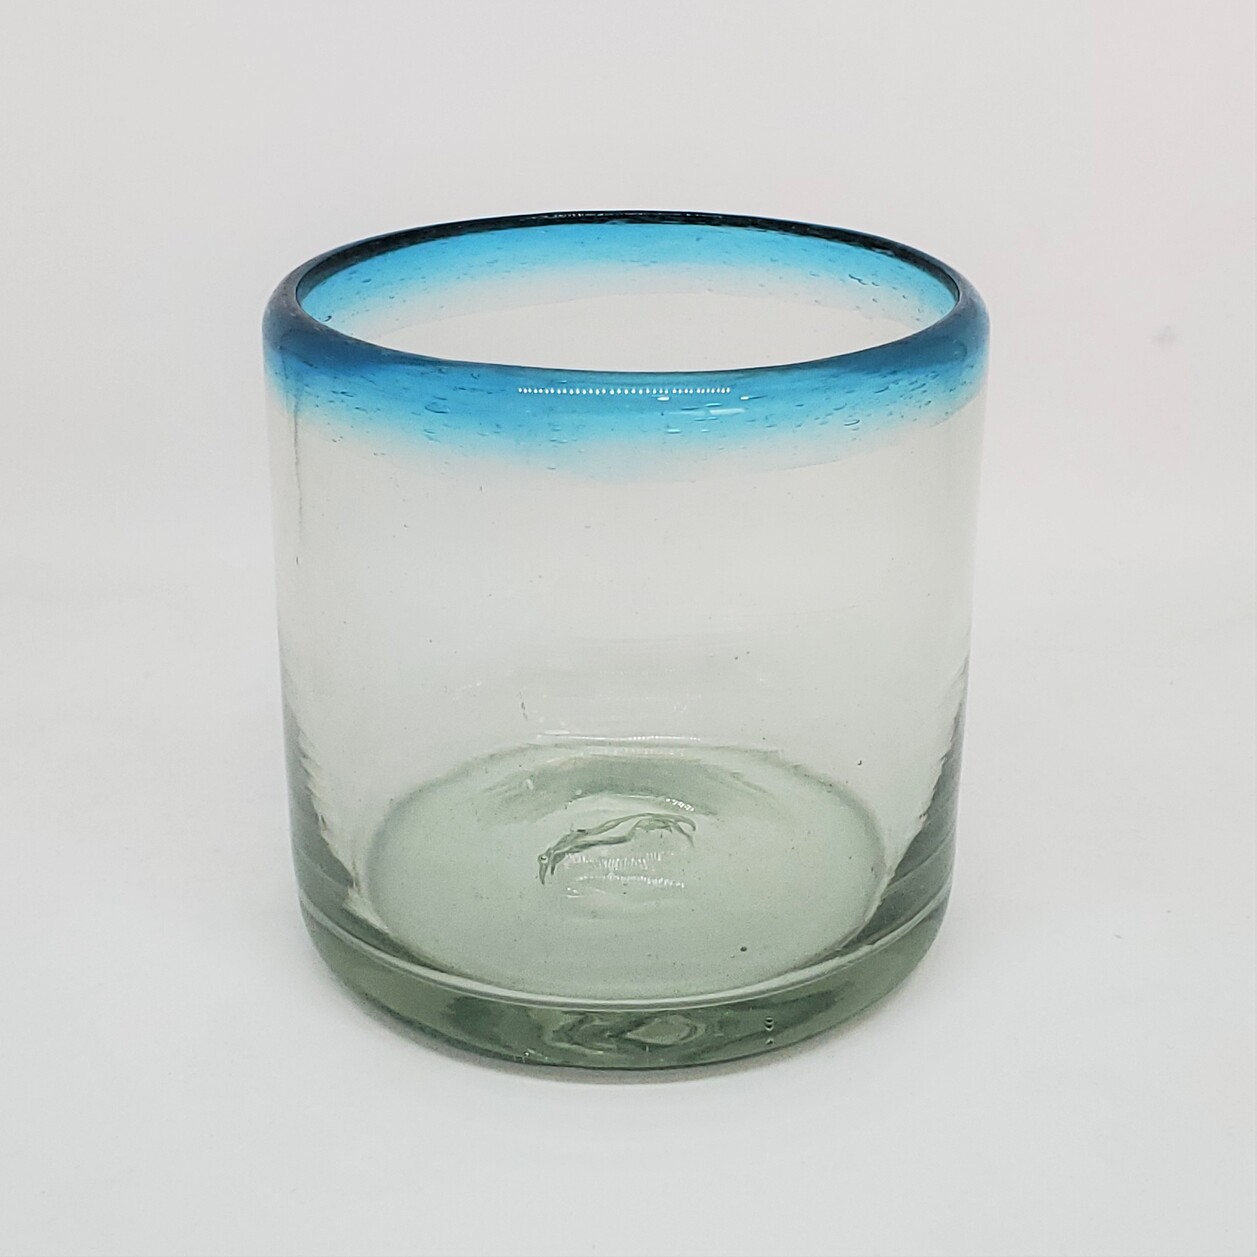 New Items / Aqua Blue Rim 8 oz DOF Rock Glasses  / These glasses are just the right size to enjoy fresh squeezed fruit juice in the moning.